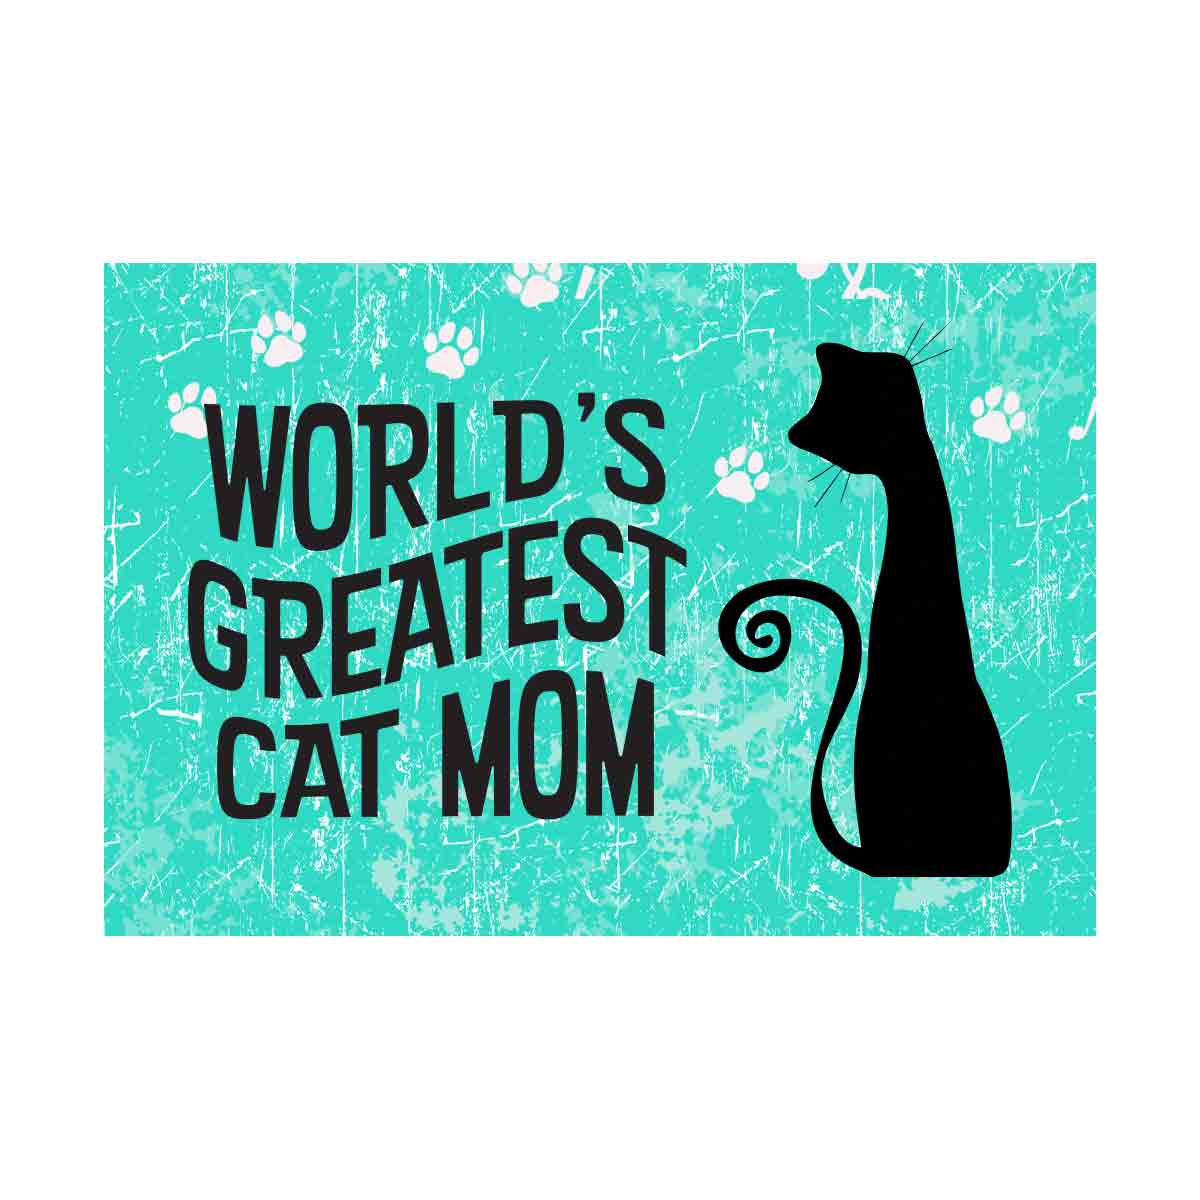 Worlds greatest cat mom - turquoise